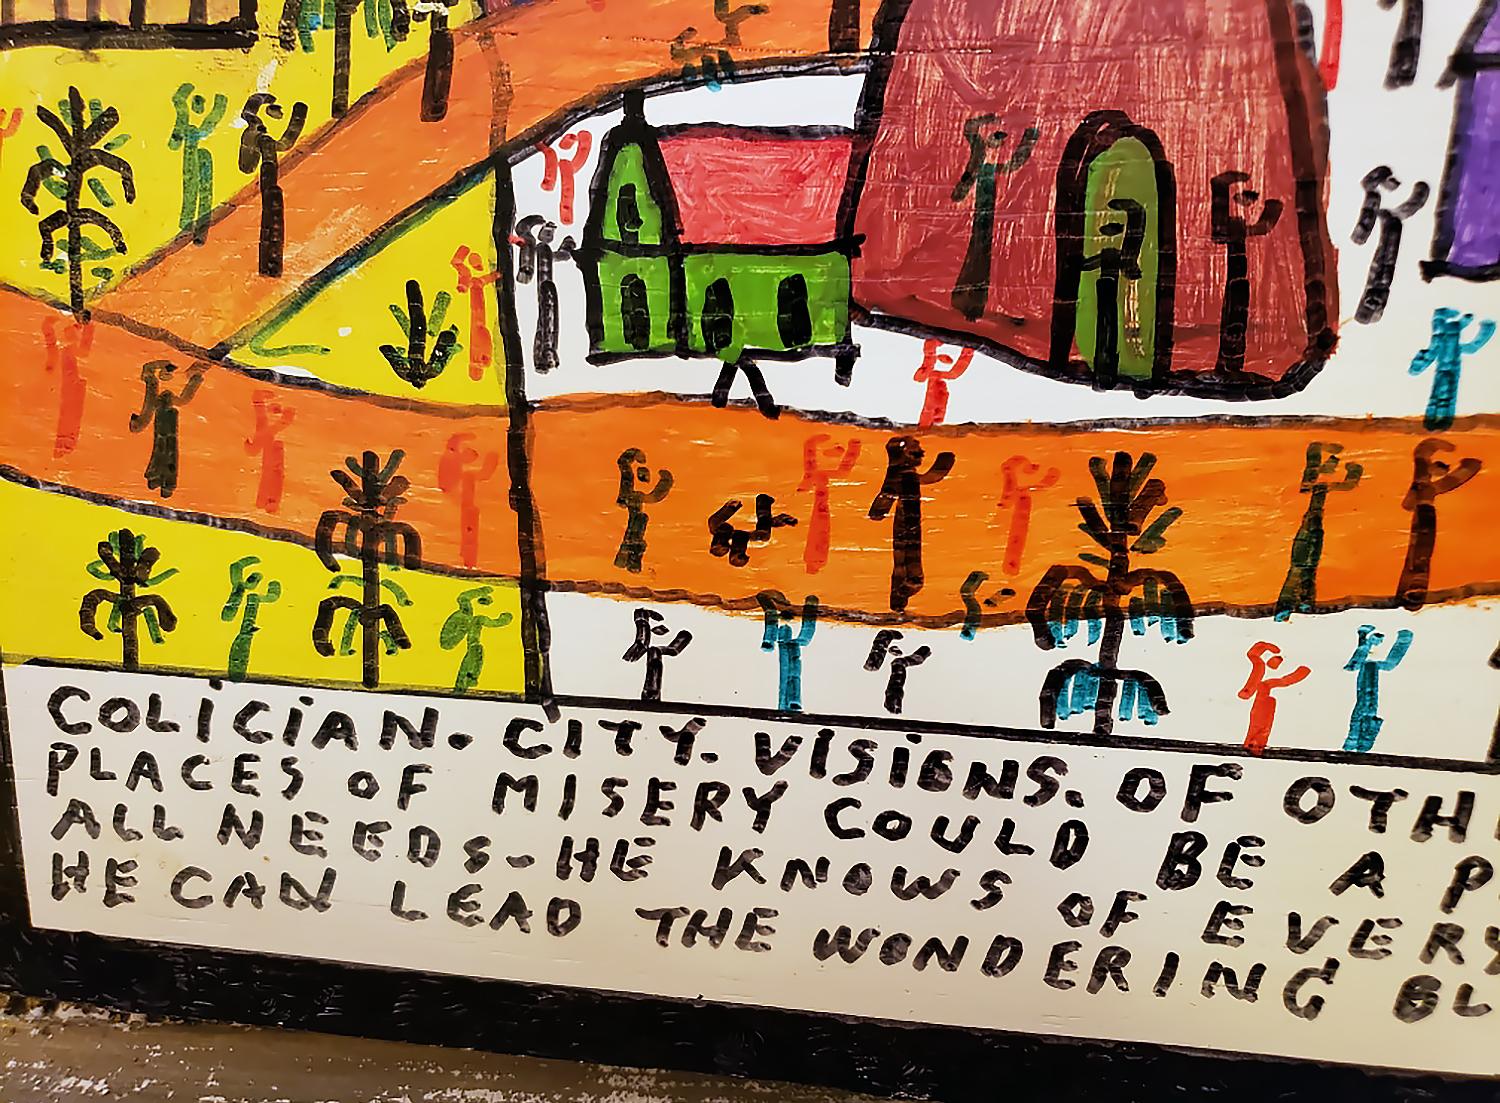  	 Howard Finster American, 1916–2001 Colician City, Visions of Other Worlds 3